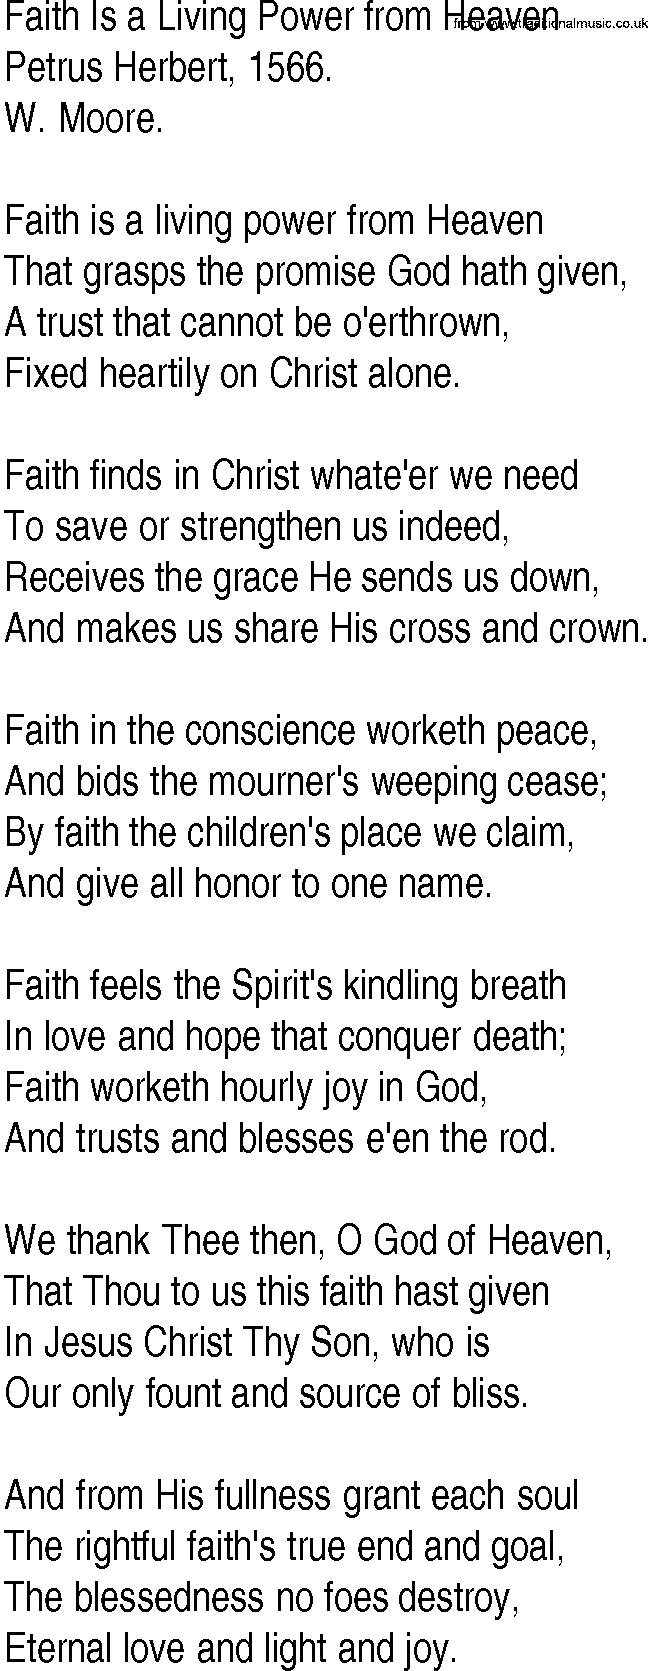 Hymn and Gospel Song: Faith Is a Living Power from Heaven by Petrus Herbert lyrics